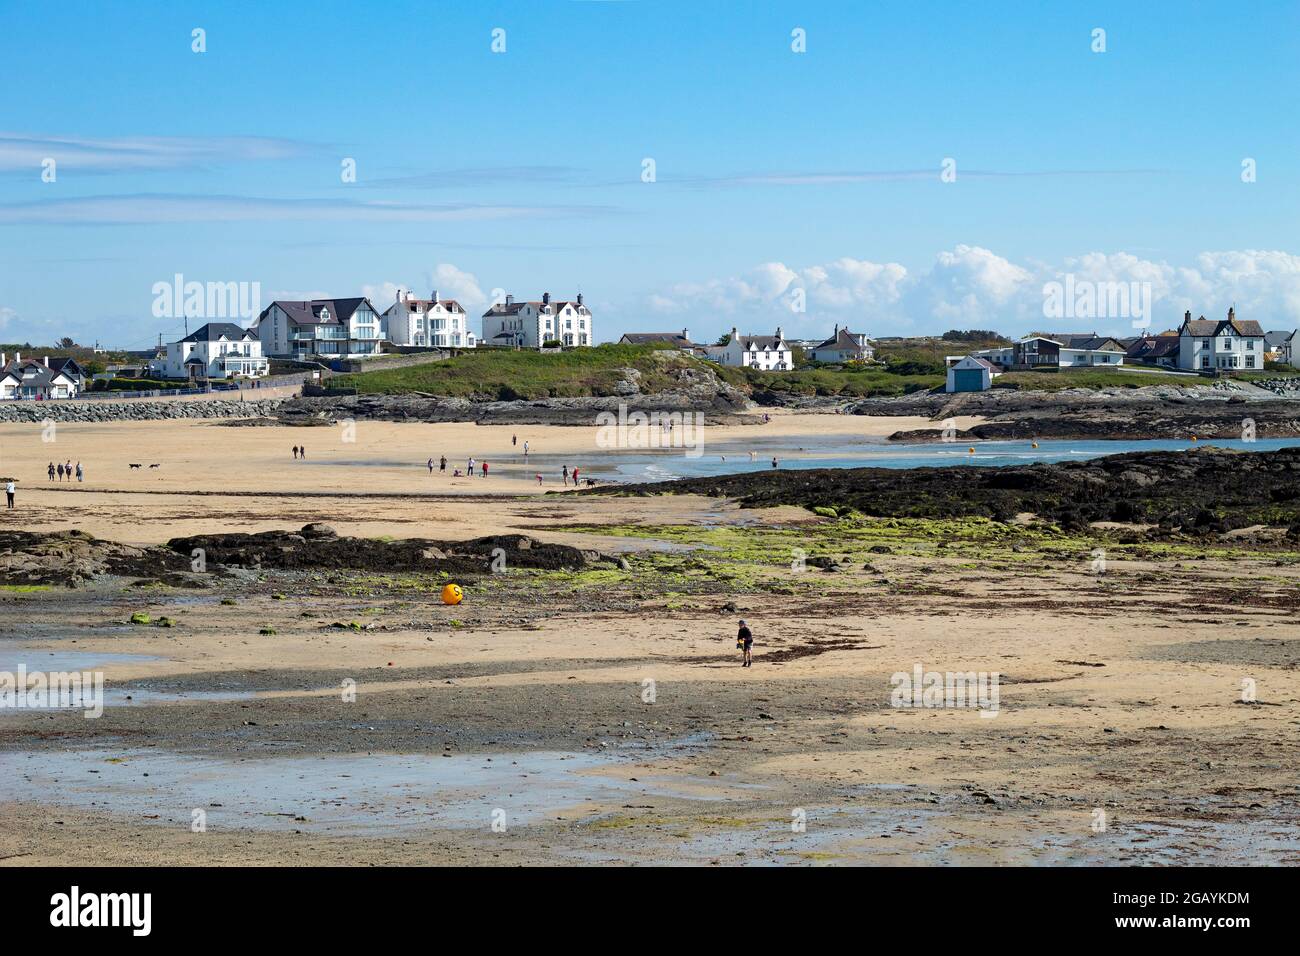 Trearddur Bay, Anglesey, Wales. Beautiful Welsh seaside landscape.  Low tide seascape with a broad sandy beach. Blue sky and copy space. Stock Photo